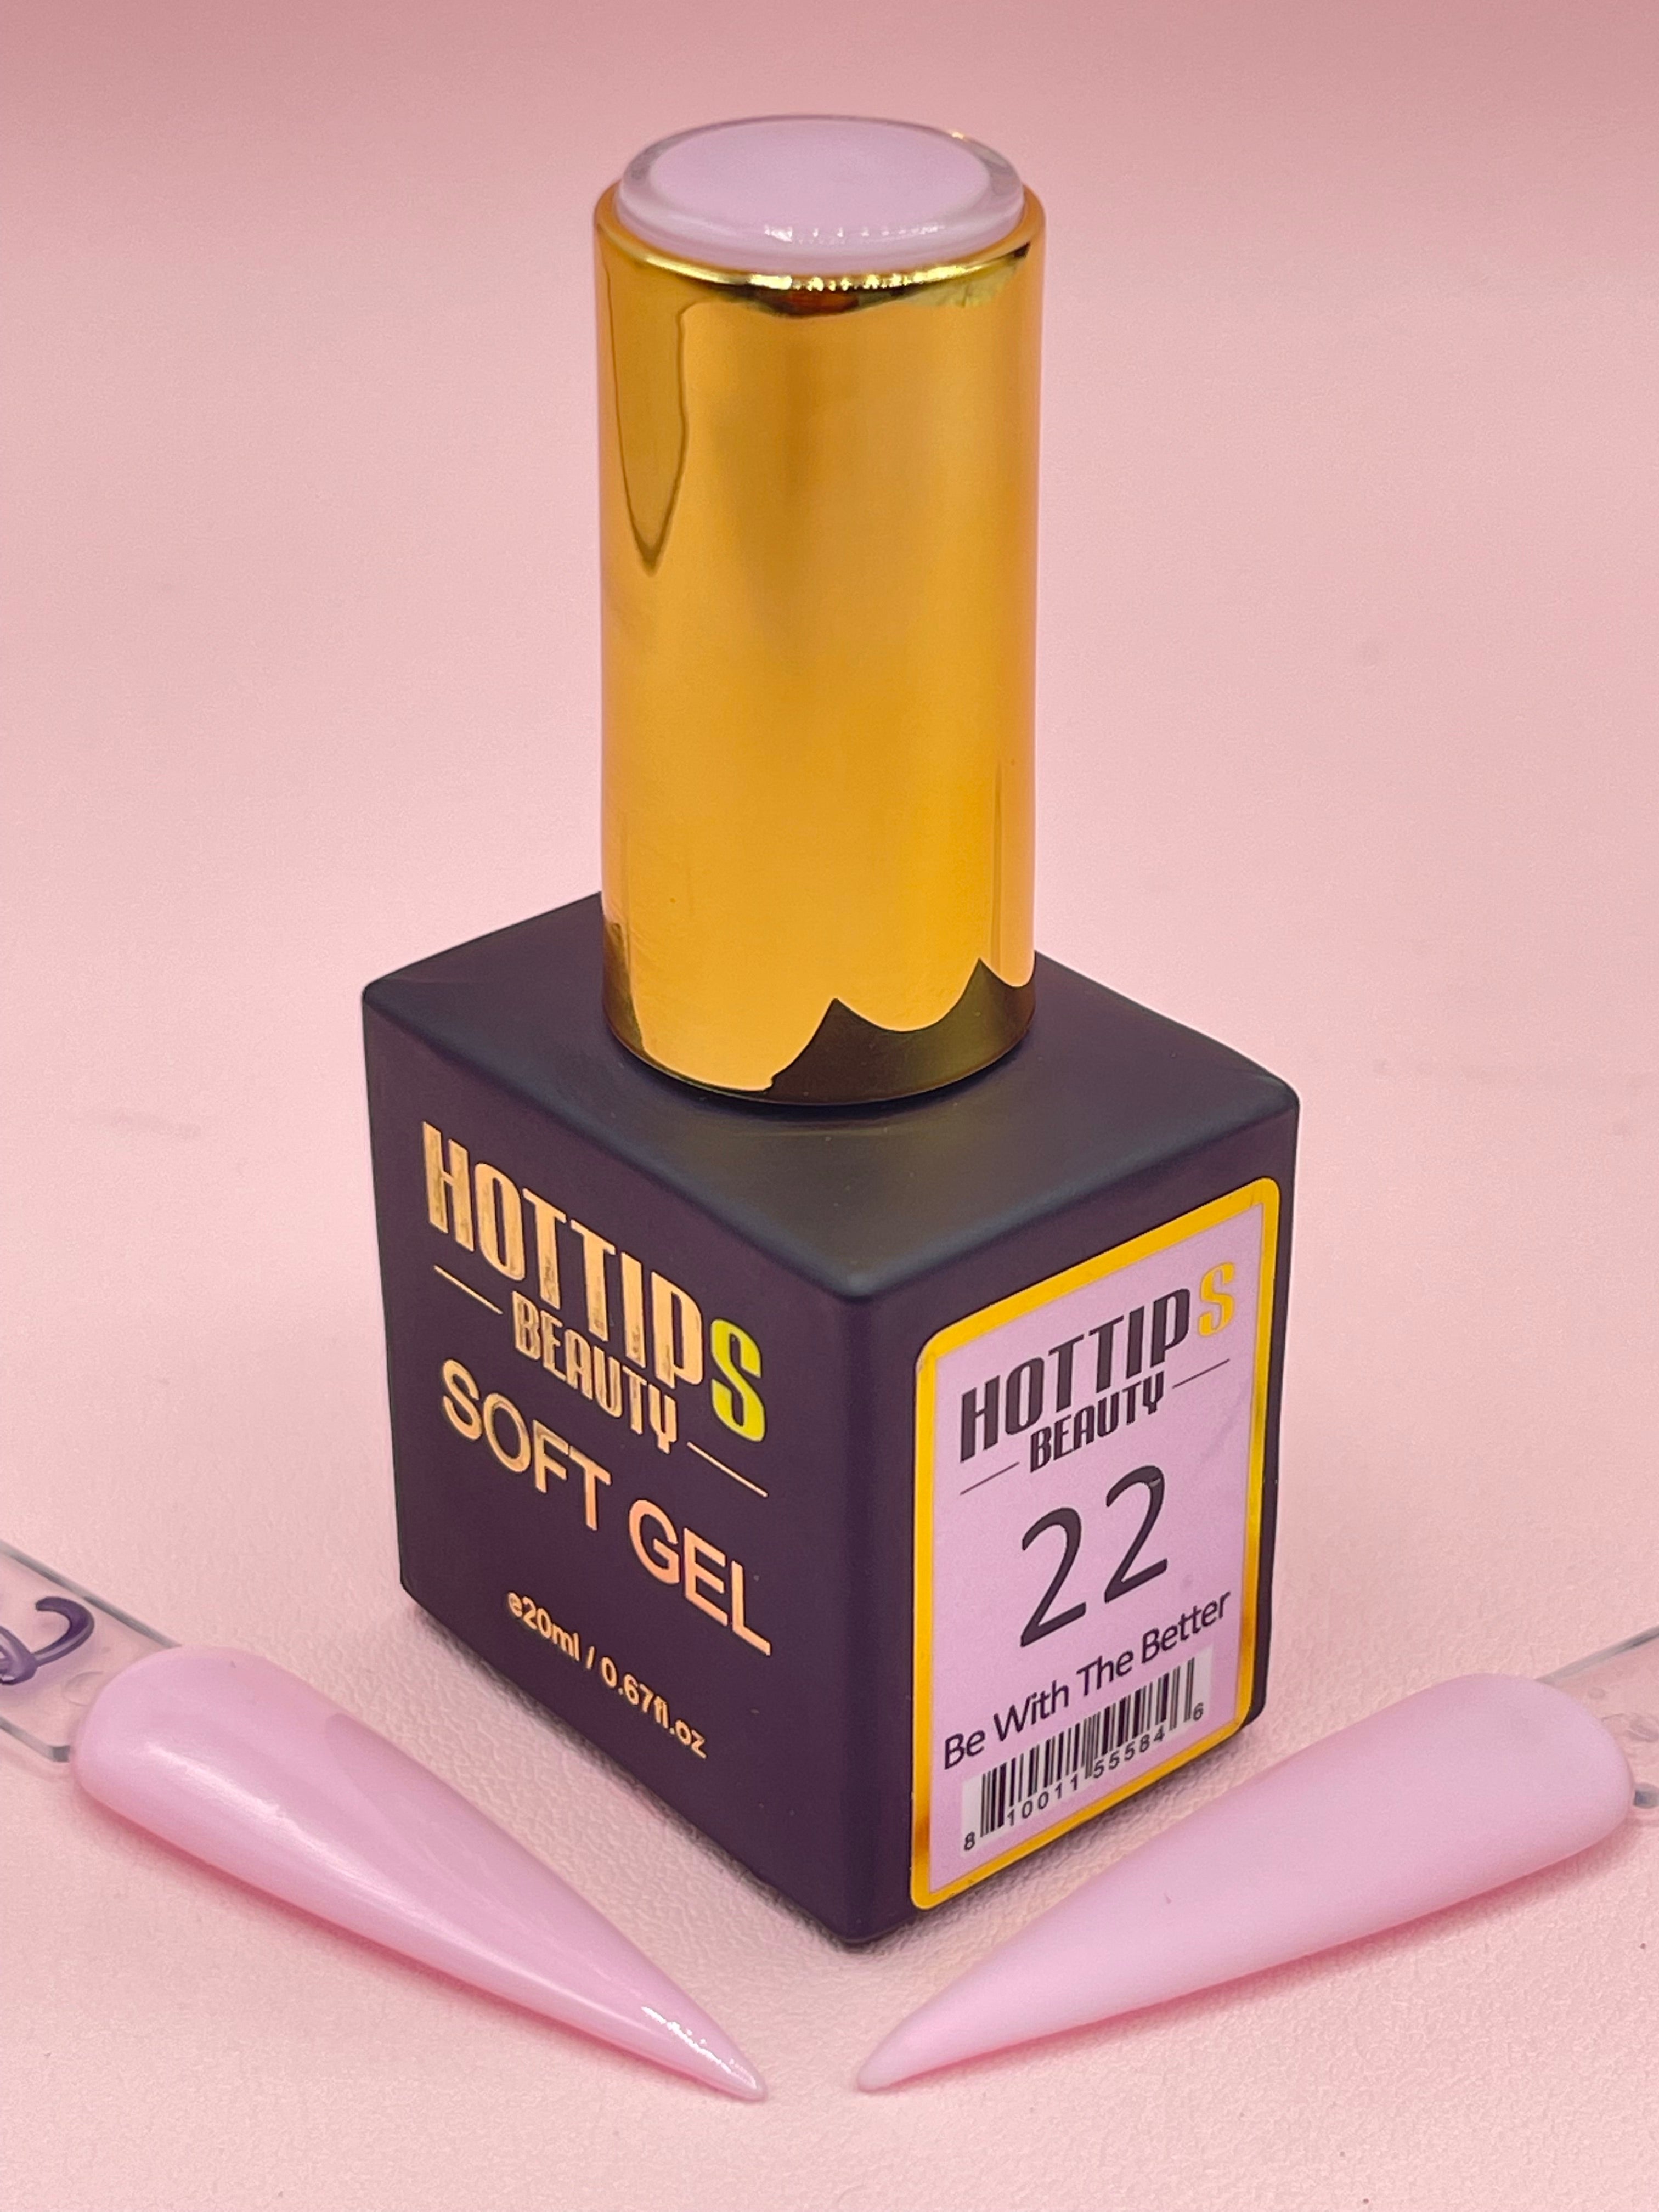 Soft Gel 22 - Be With The Better